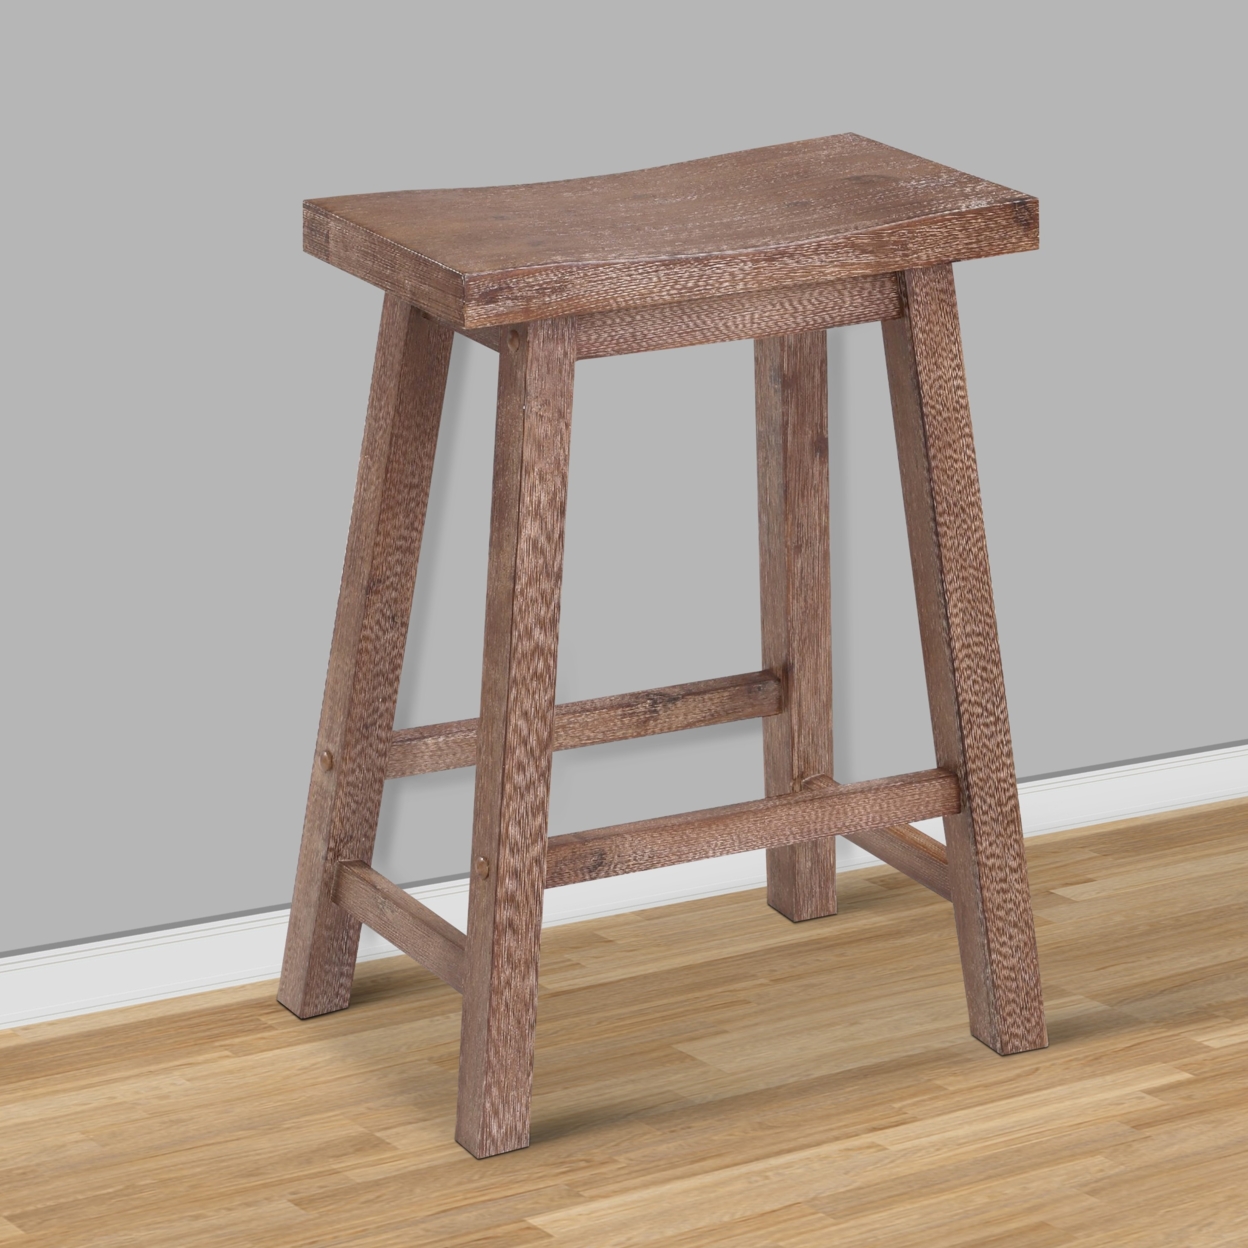 Wooden Frame Saddle Seat Counter Height Stool With Angled Legs, Brown- Saltoro Sherpi